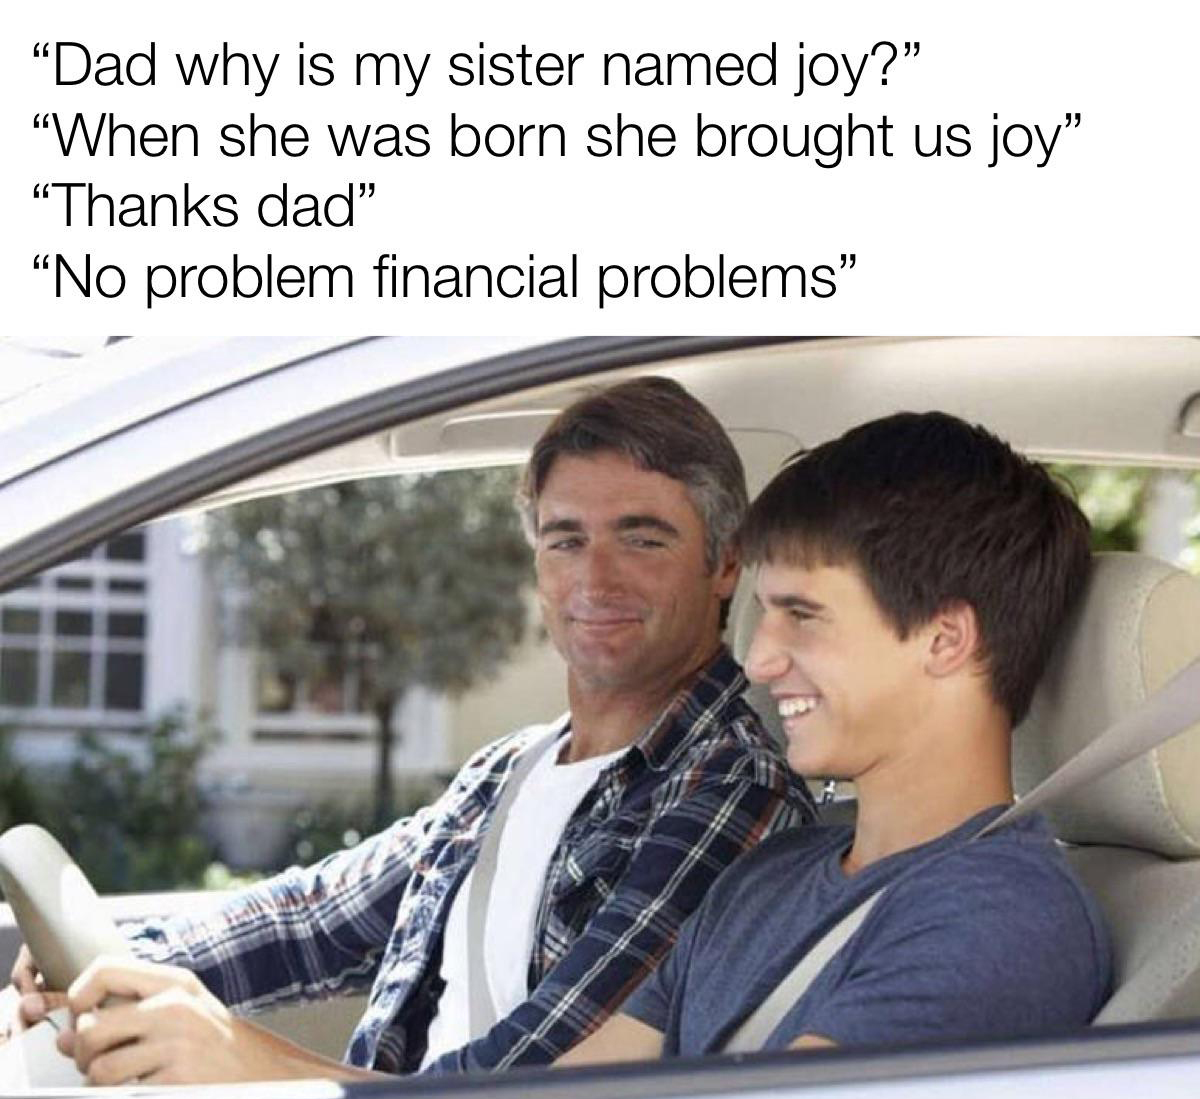 dank memes - british museum memes - Dad why is my sister named joy? When she was born she brought us joy "Thanks dad" No problem financial problems"